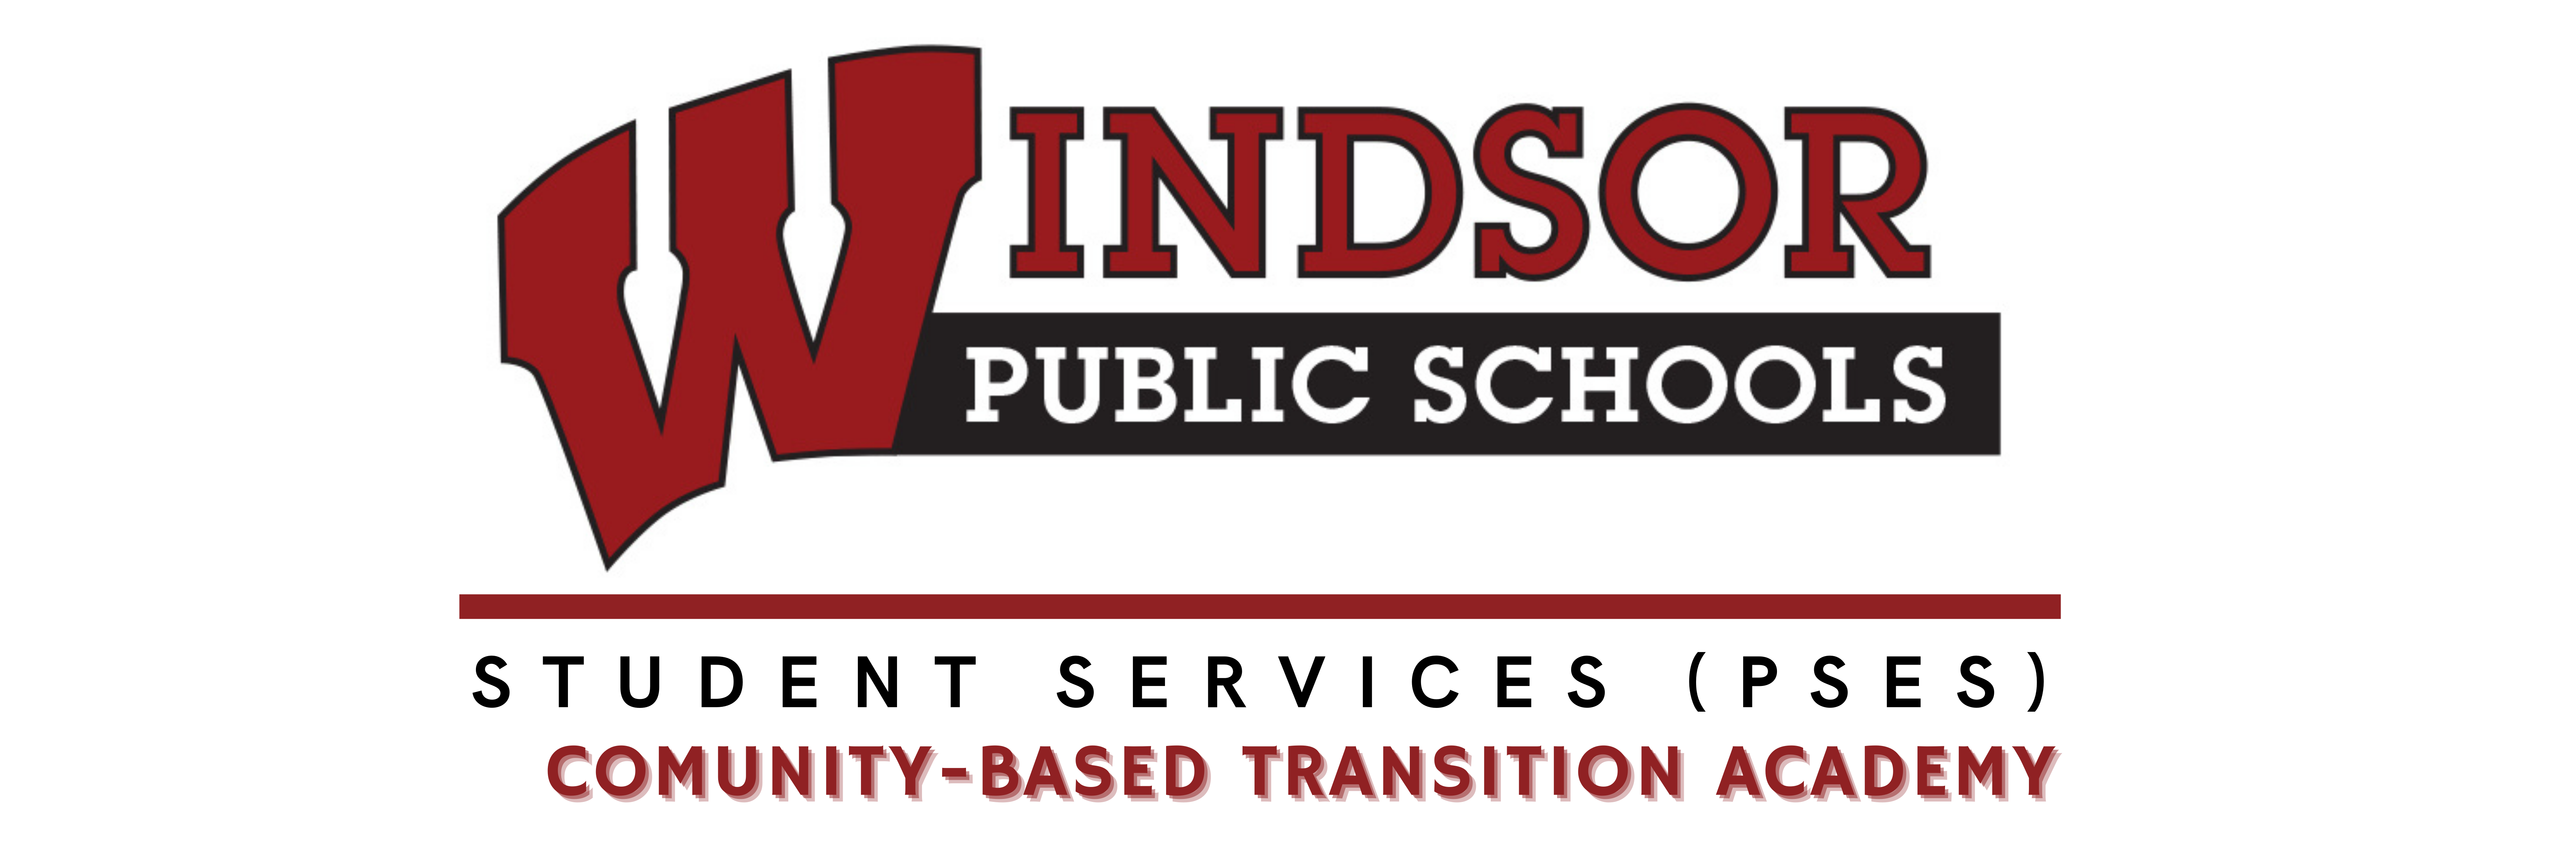 WPS LOGO/ STUDENT SERVICES/COMMUNITY BASED TRANSITION ACADEMY